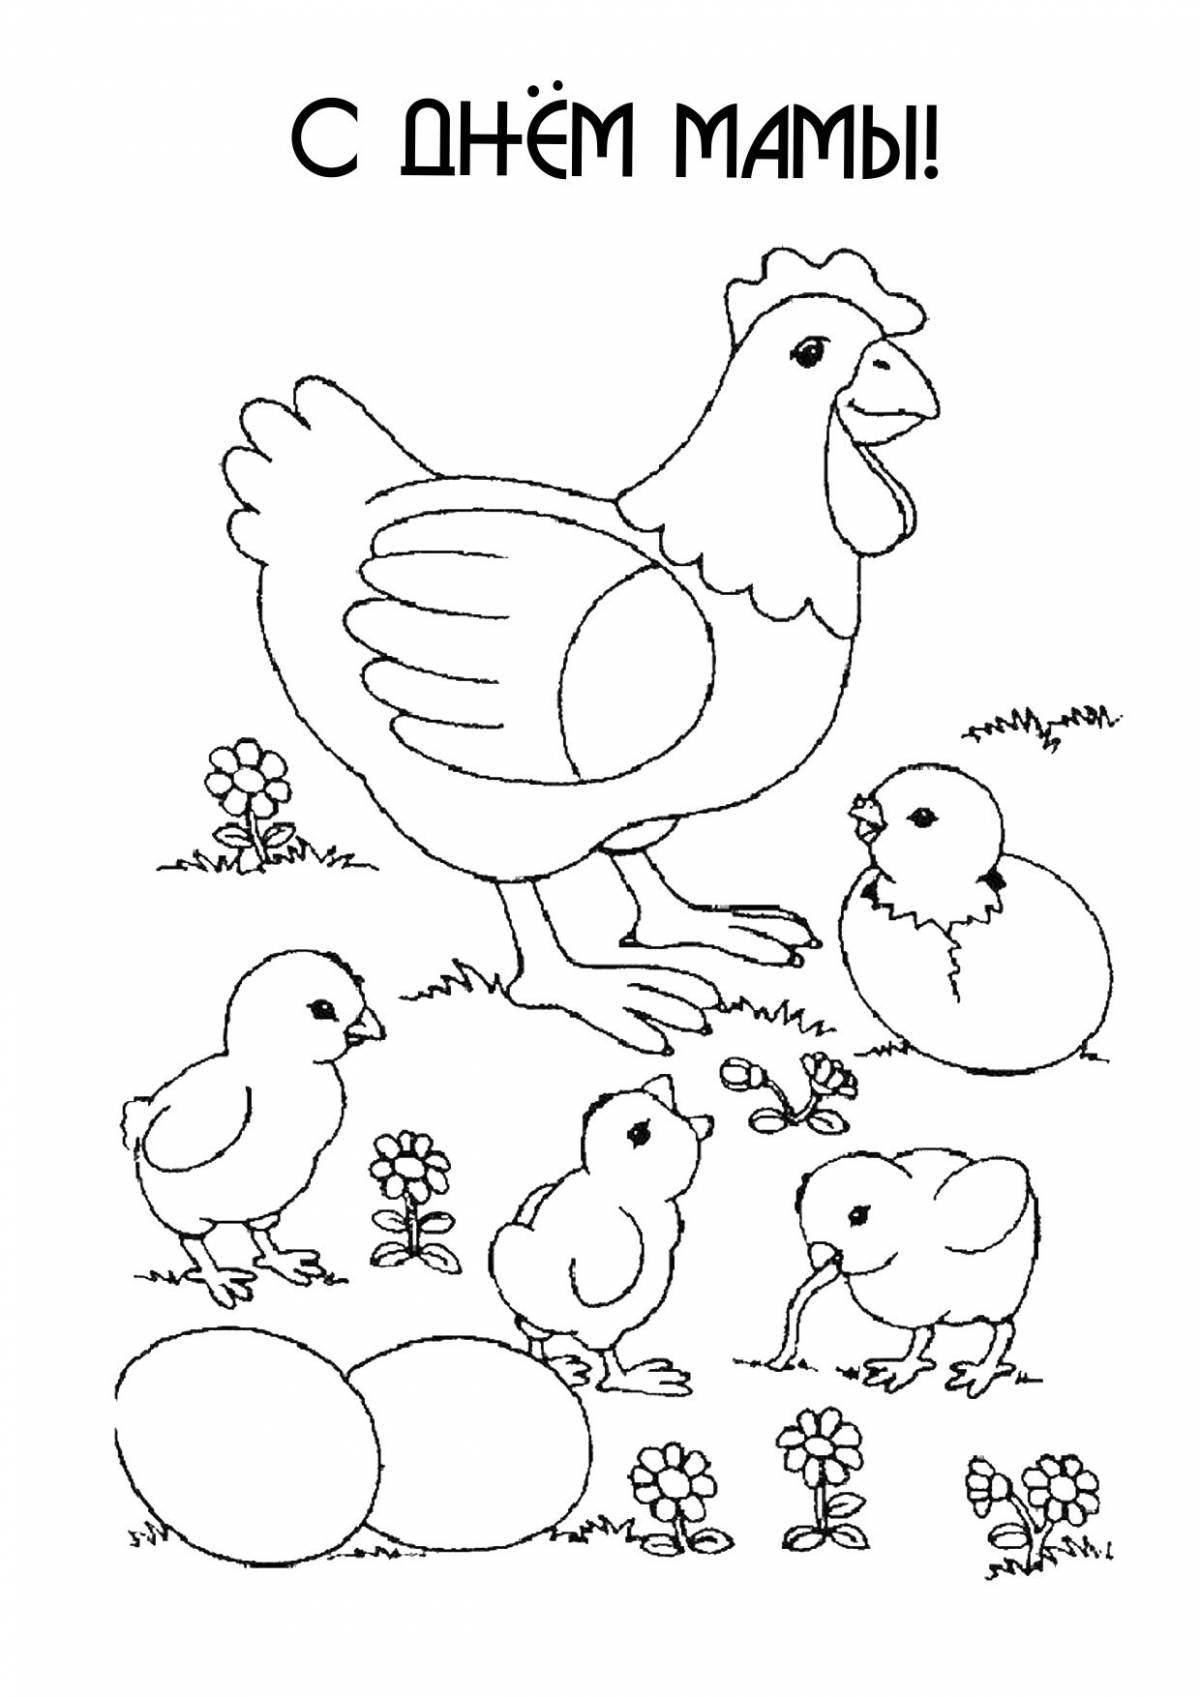 Colorful bird coloring page for 6-7 year olds